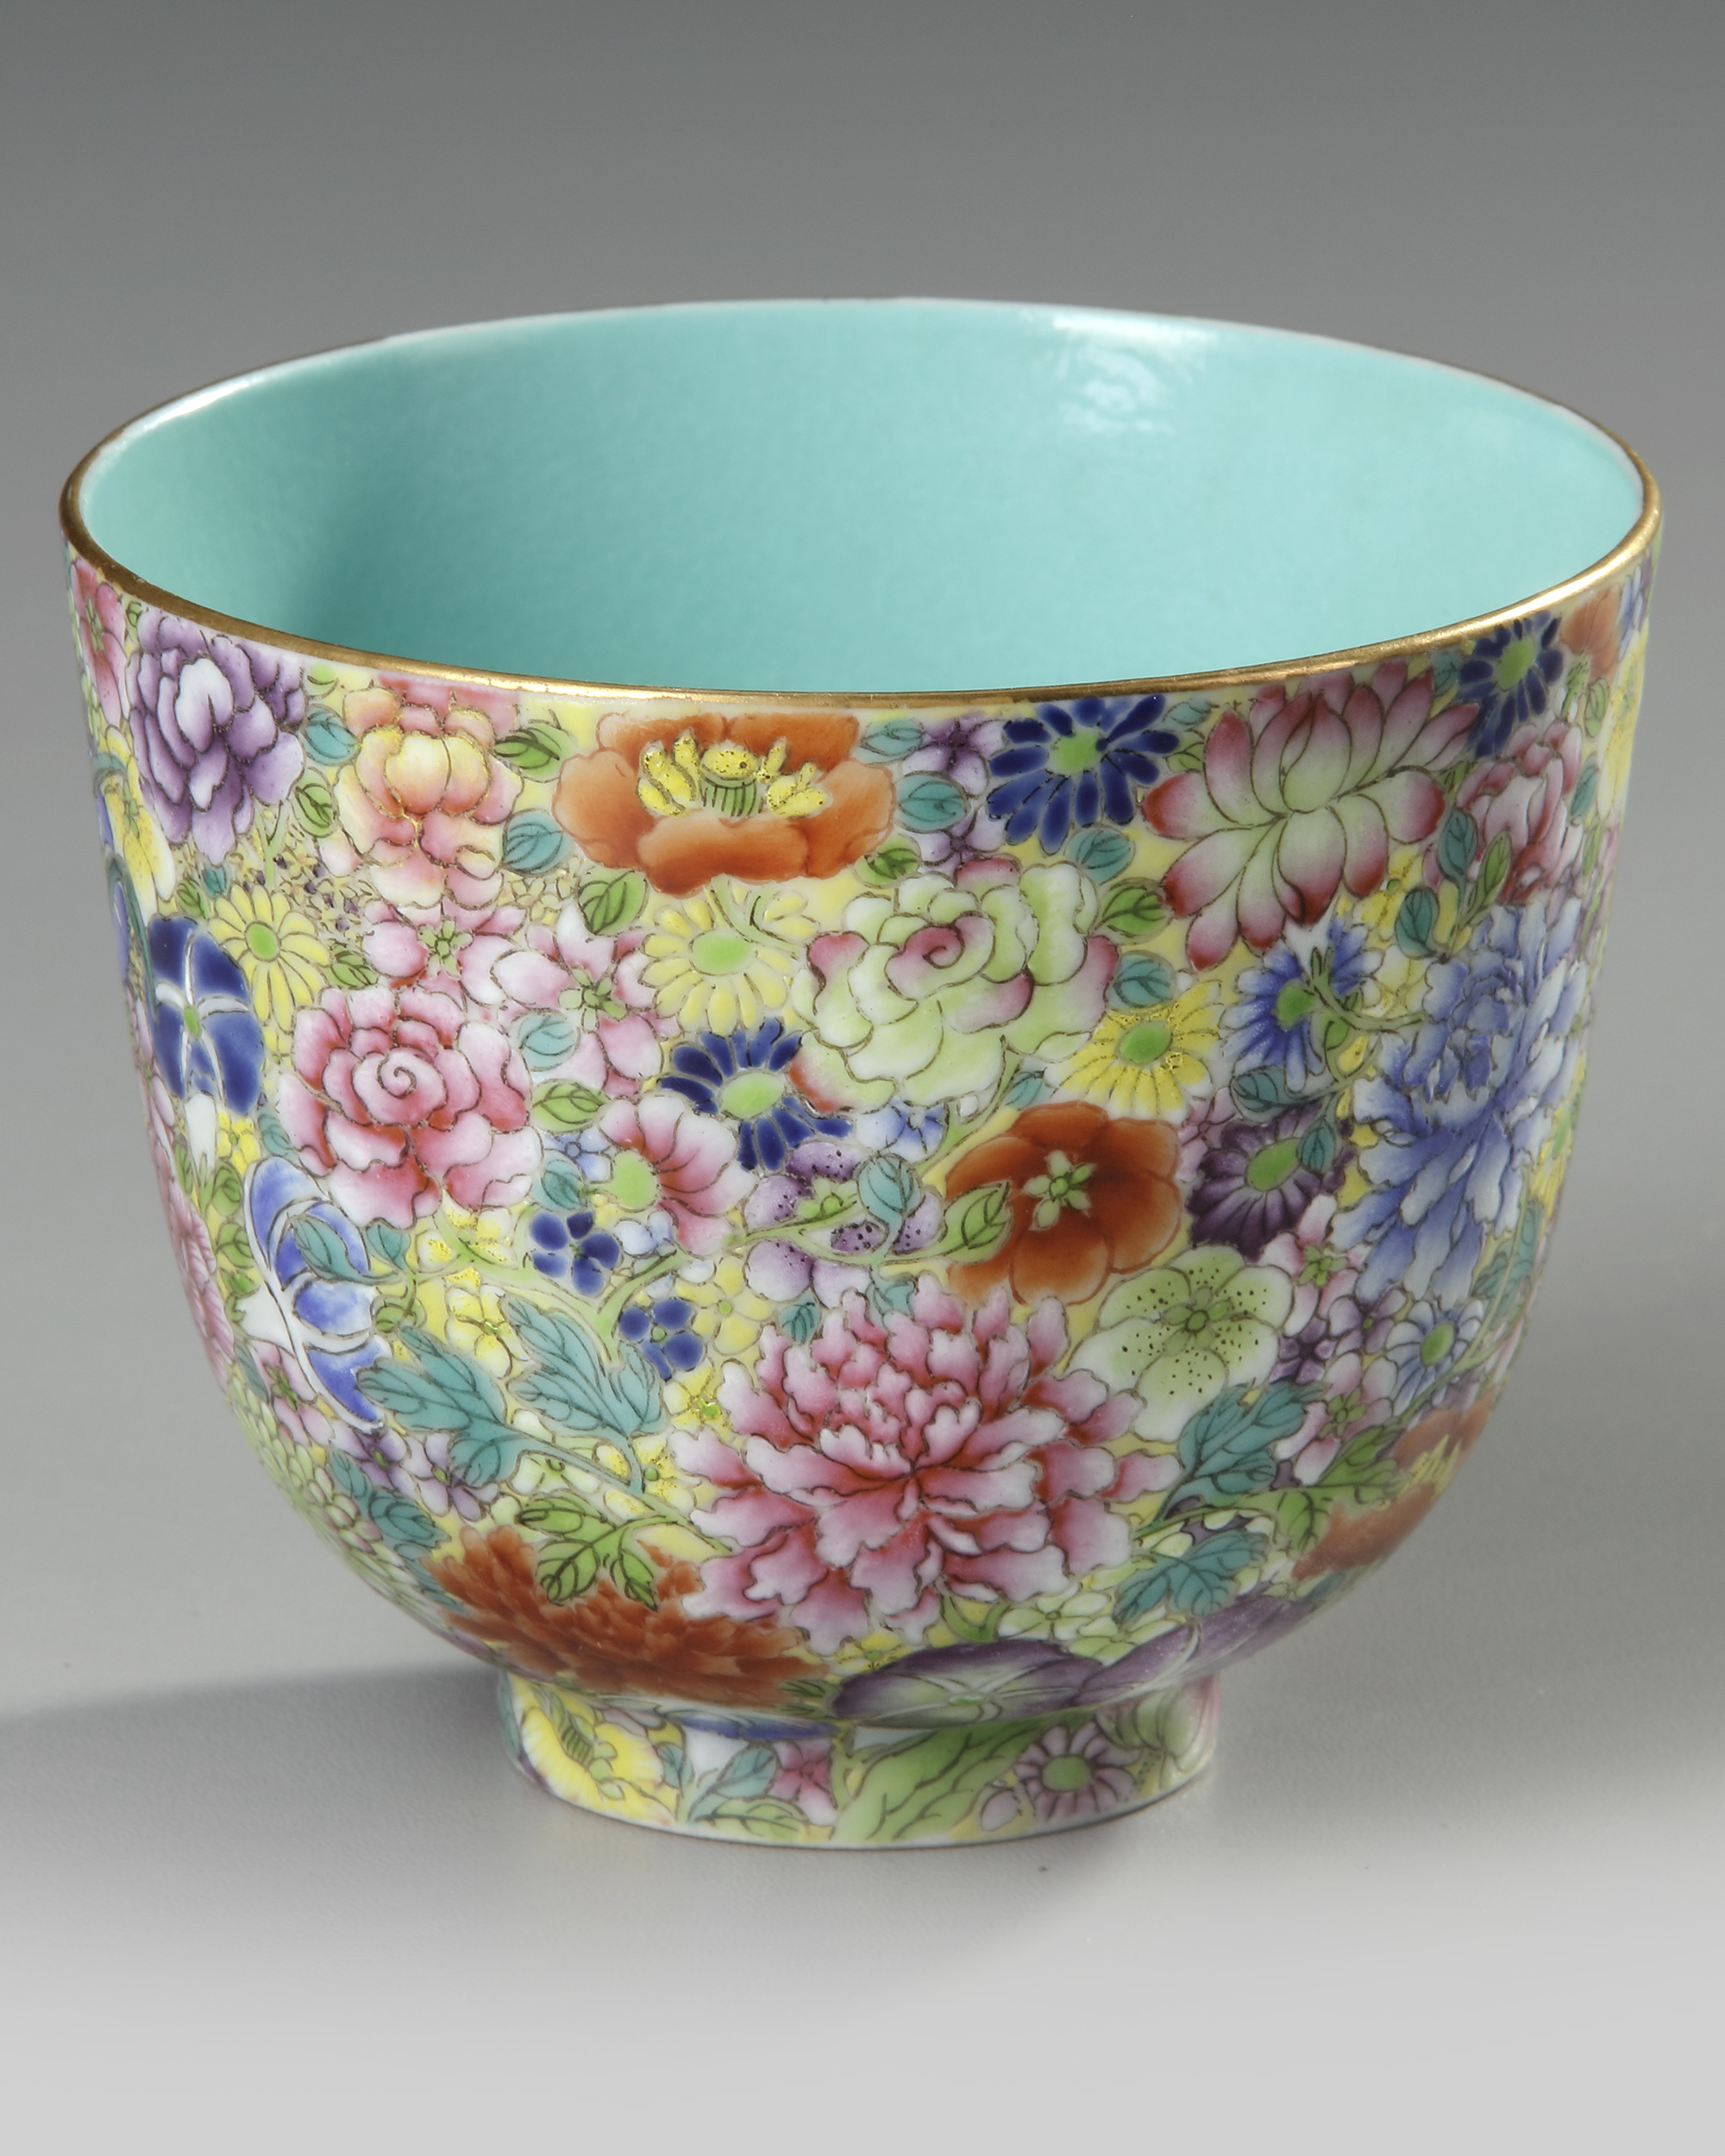 A CHINESE FAMILLE-ROSE 'MILLE-FLEURS' CUP, 19TH-20TH CENTURY - Image 3 of 4